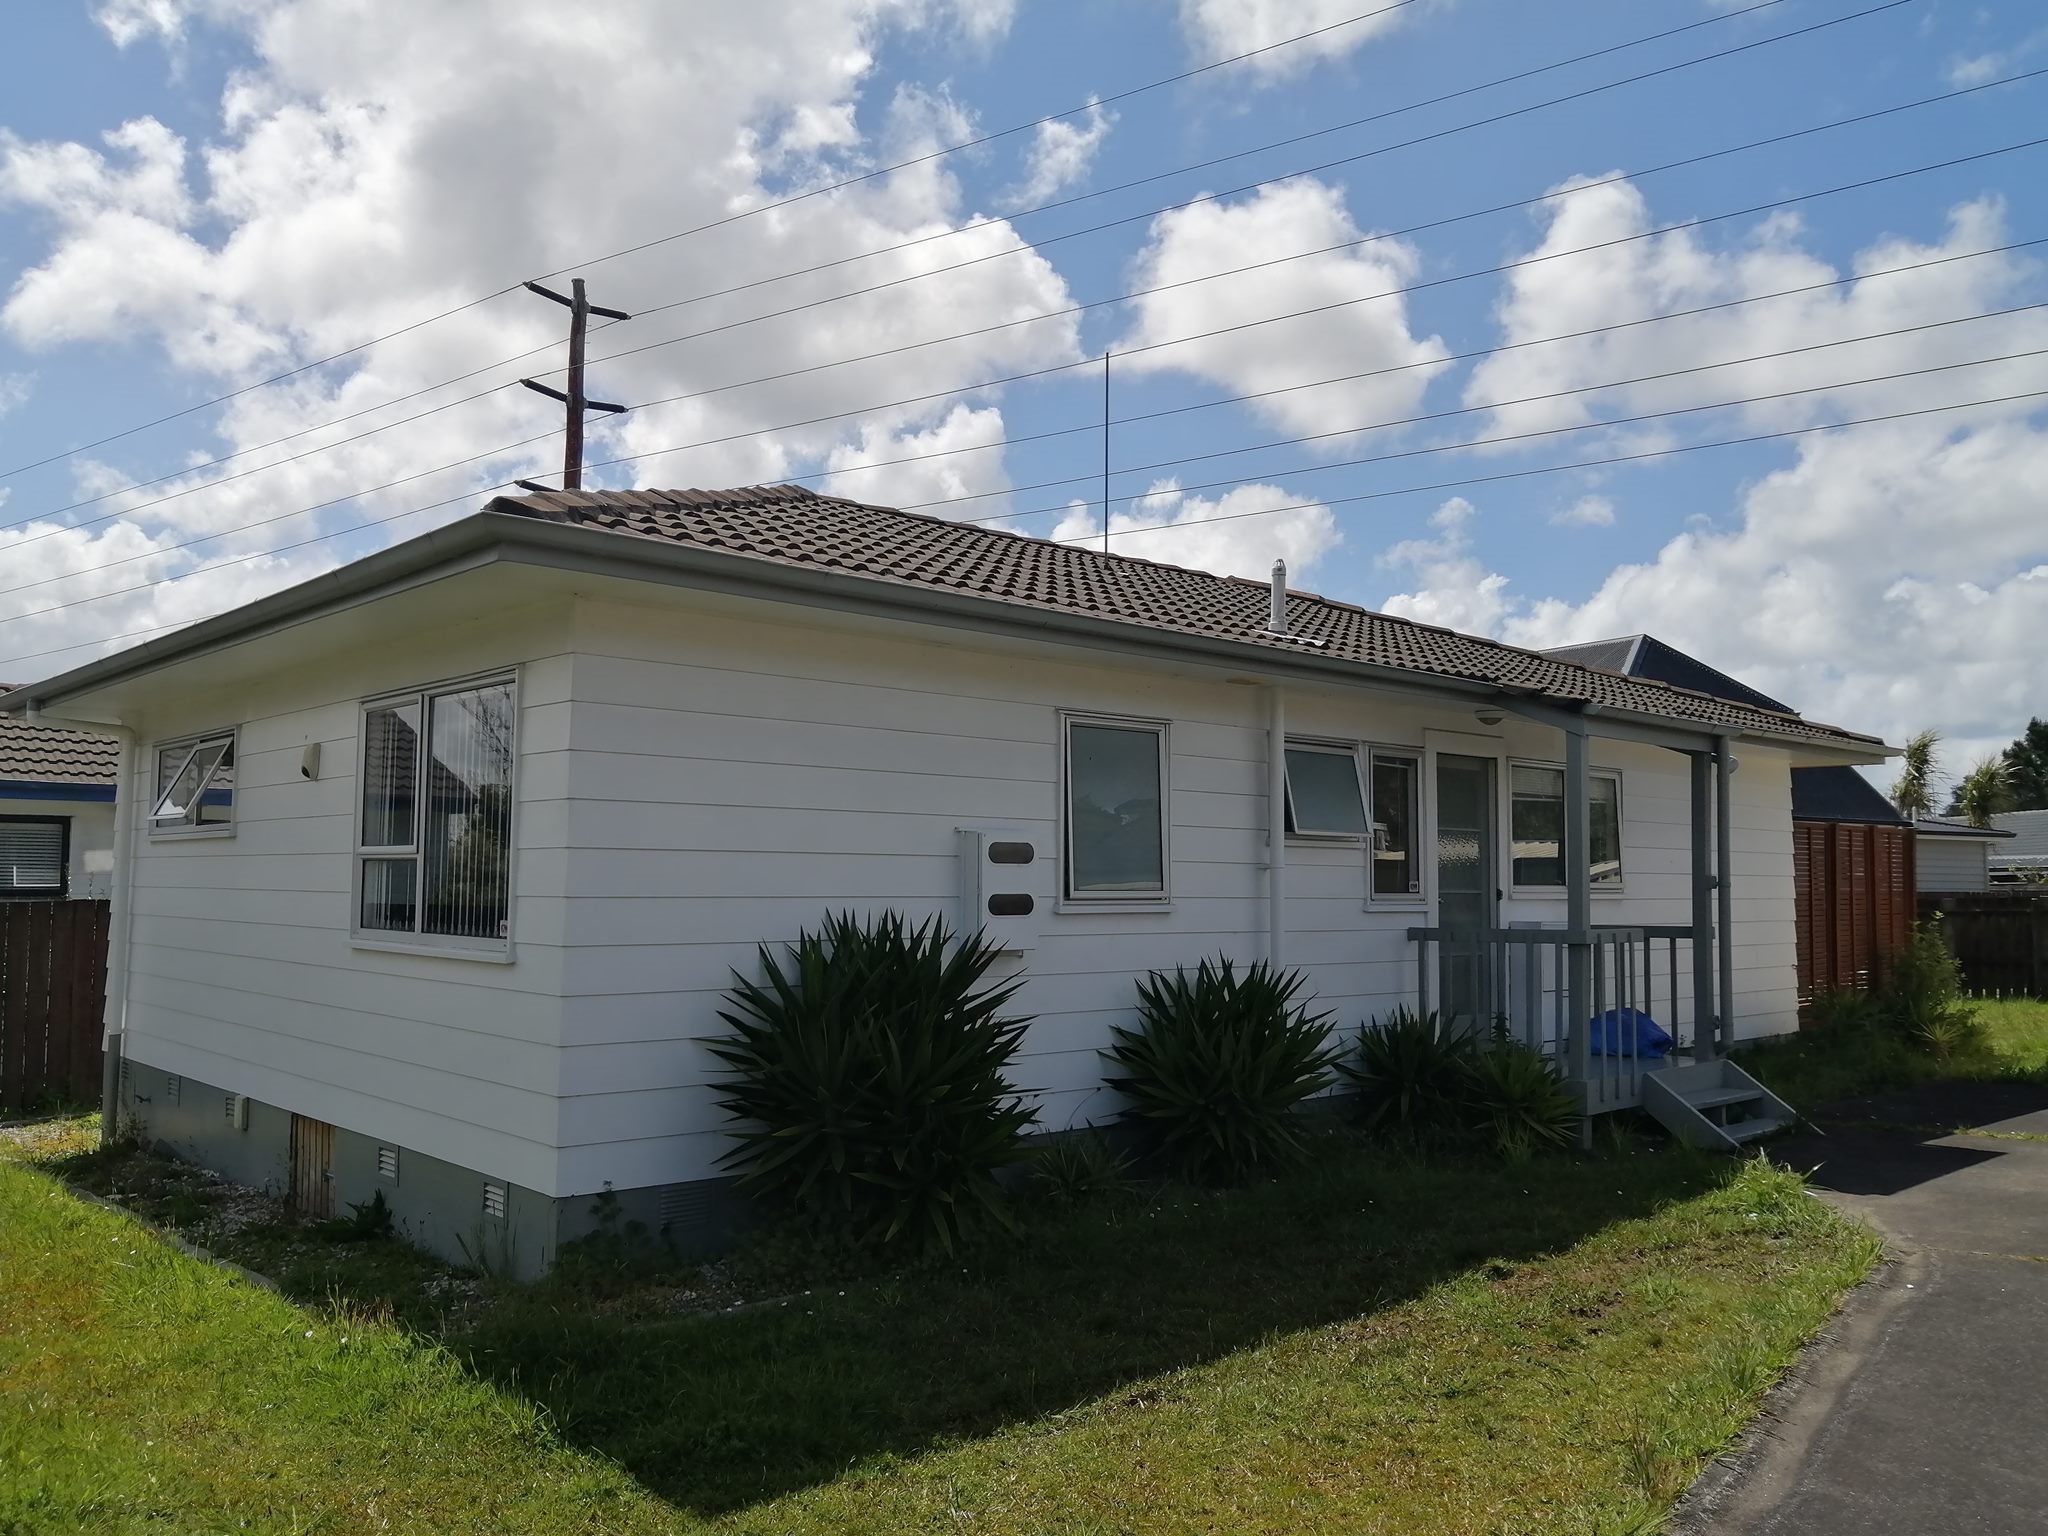 Unsworth Heights, 3 bedrooms 41 Meadowood Drive, Unsworth Heights, North Shore City, Auckland